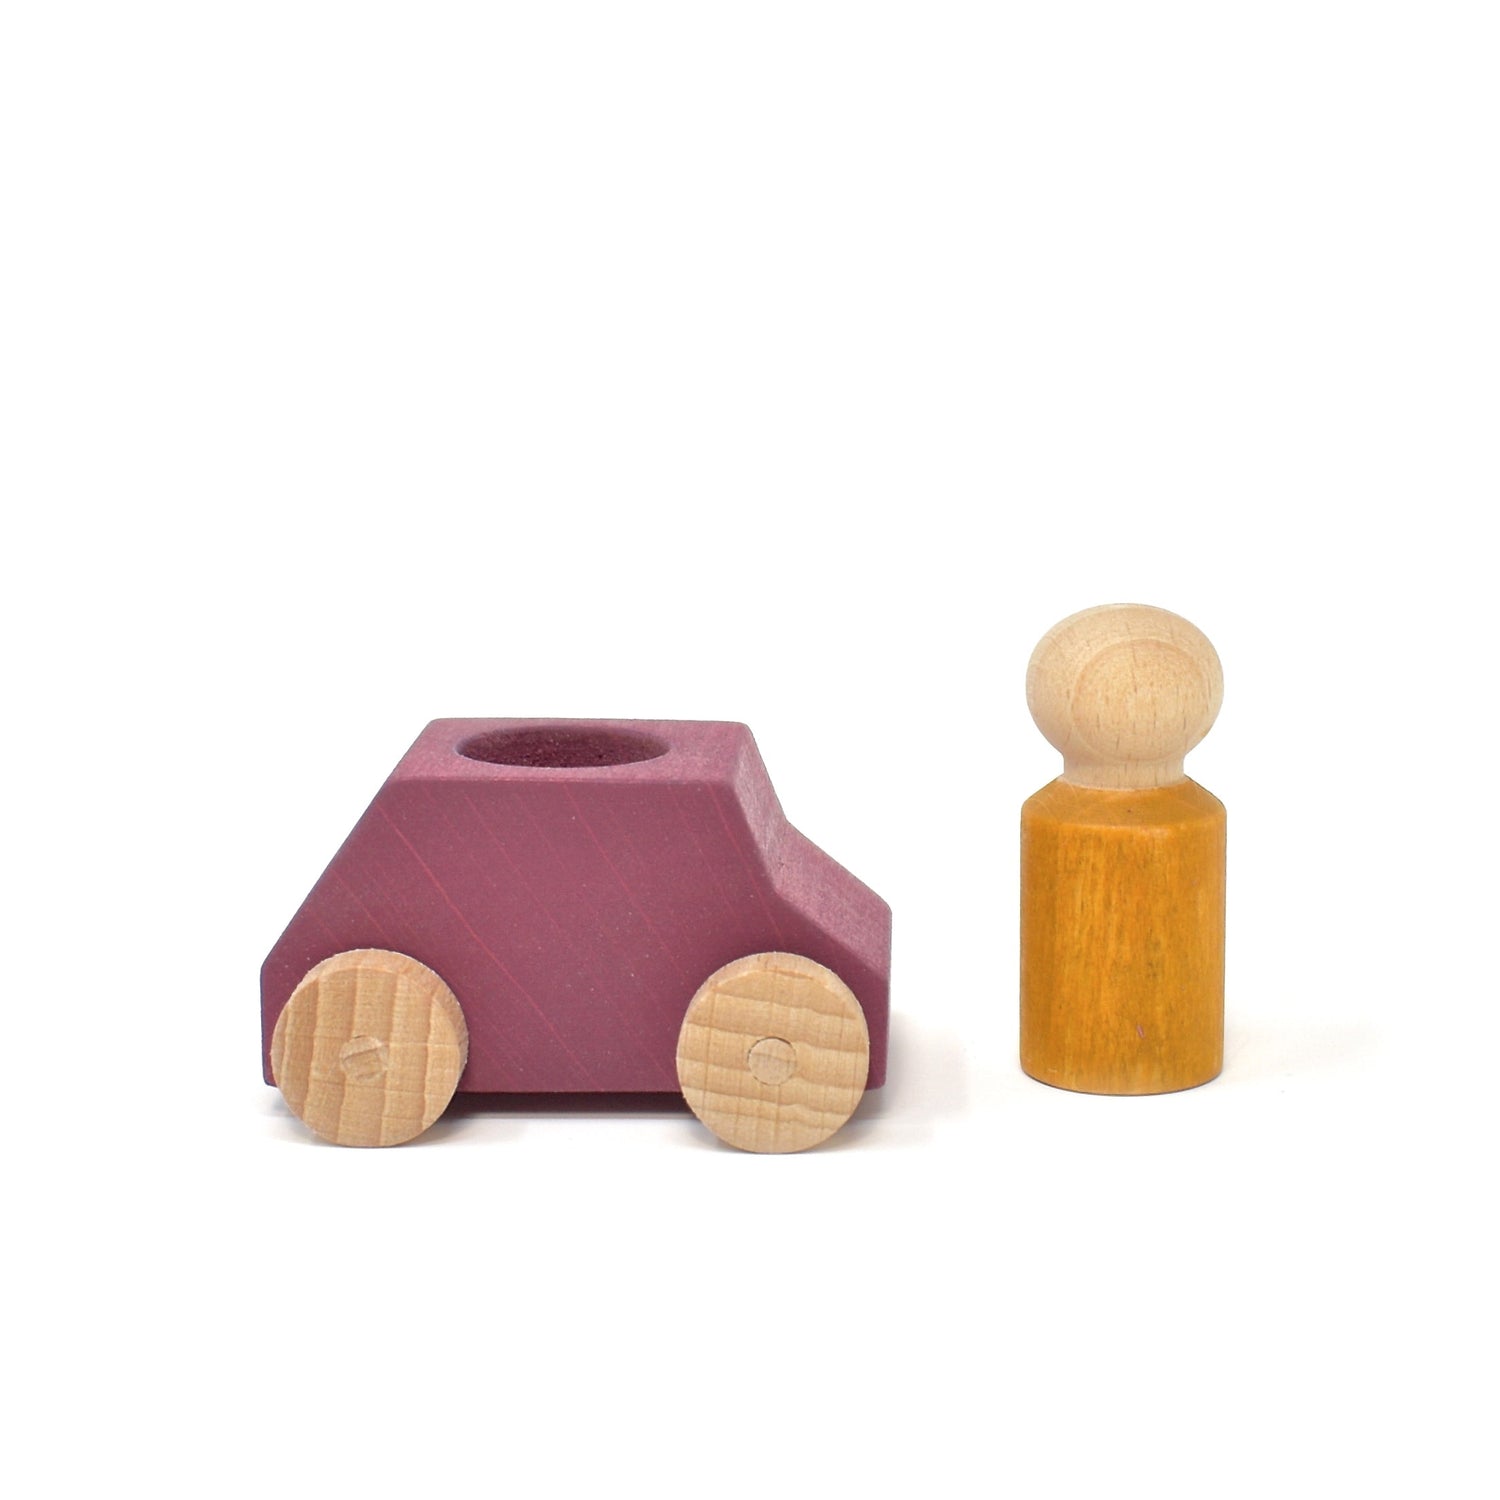 LUBULONA CAR Plum with Ochre Figure by LUBULONA - The Playful Collective